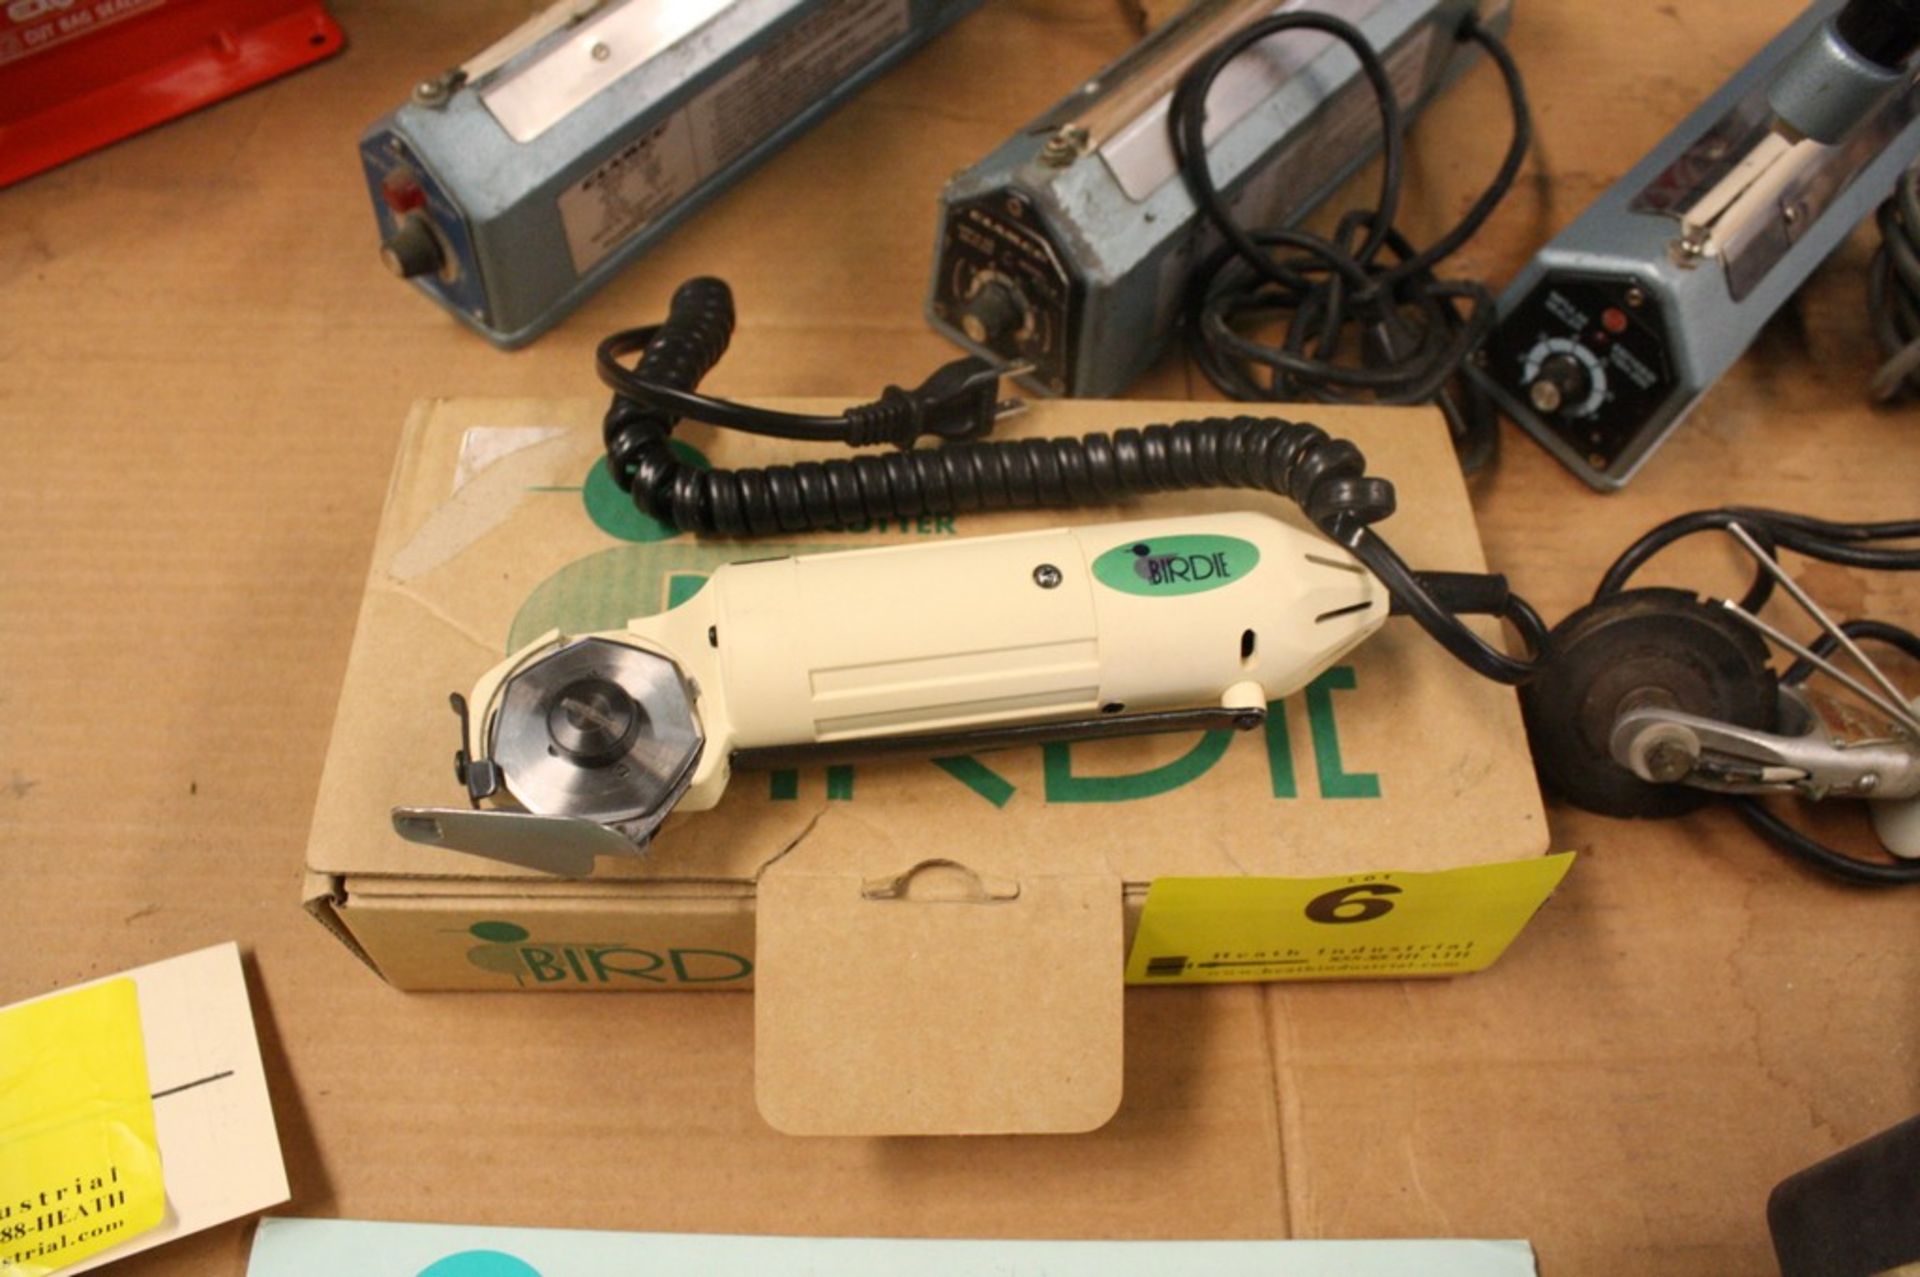 BIRDIE / KM MODEL RS-50 ROTARY FABRIC / CLOTH CUTTER IN BOX